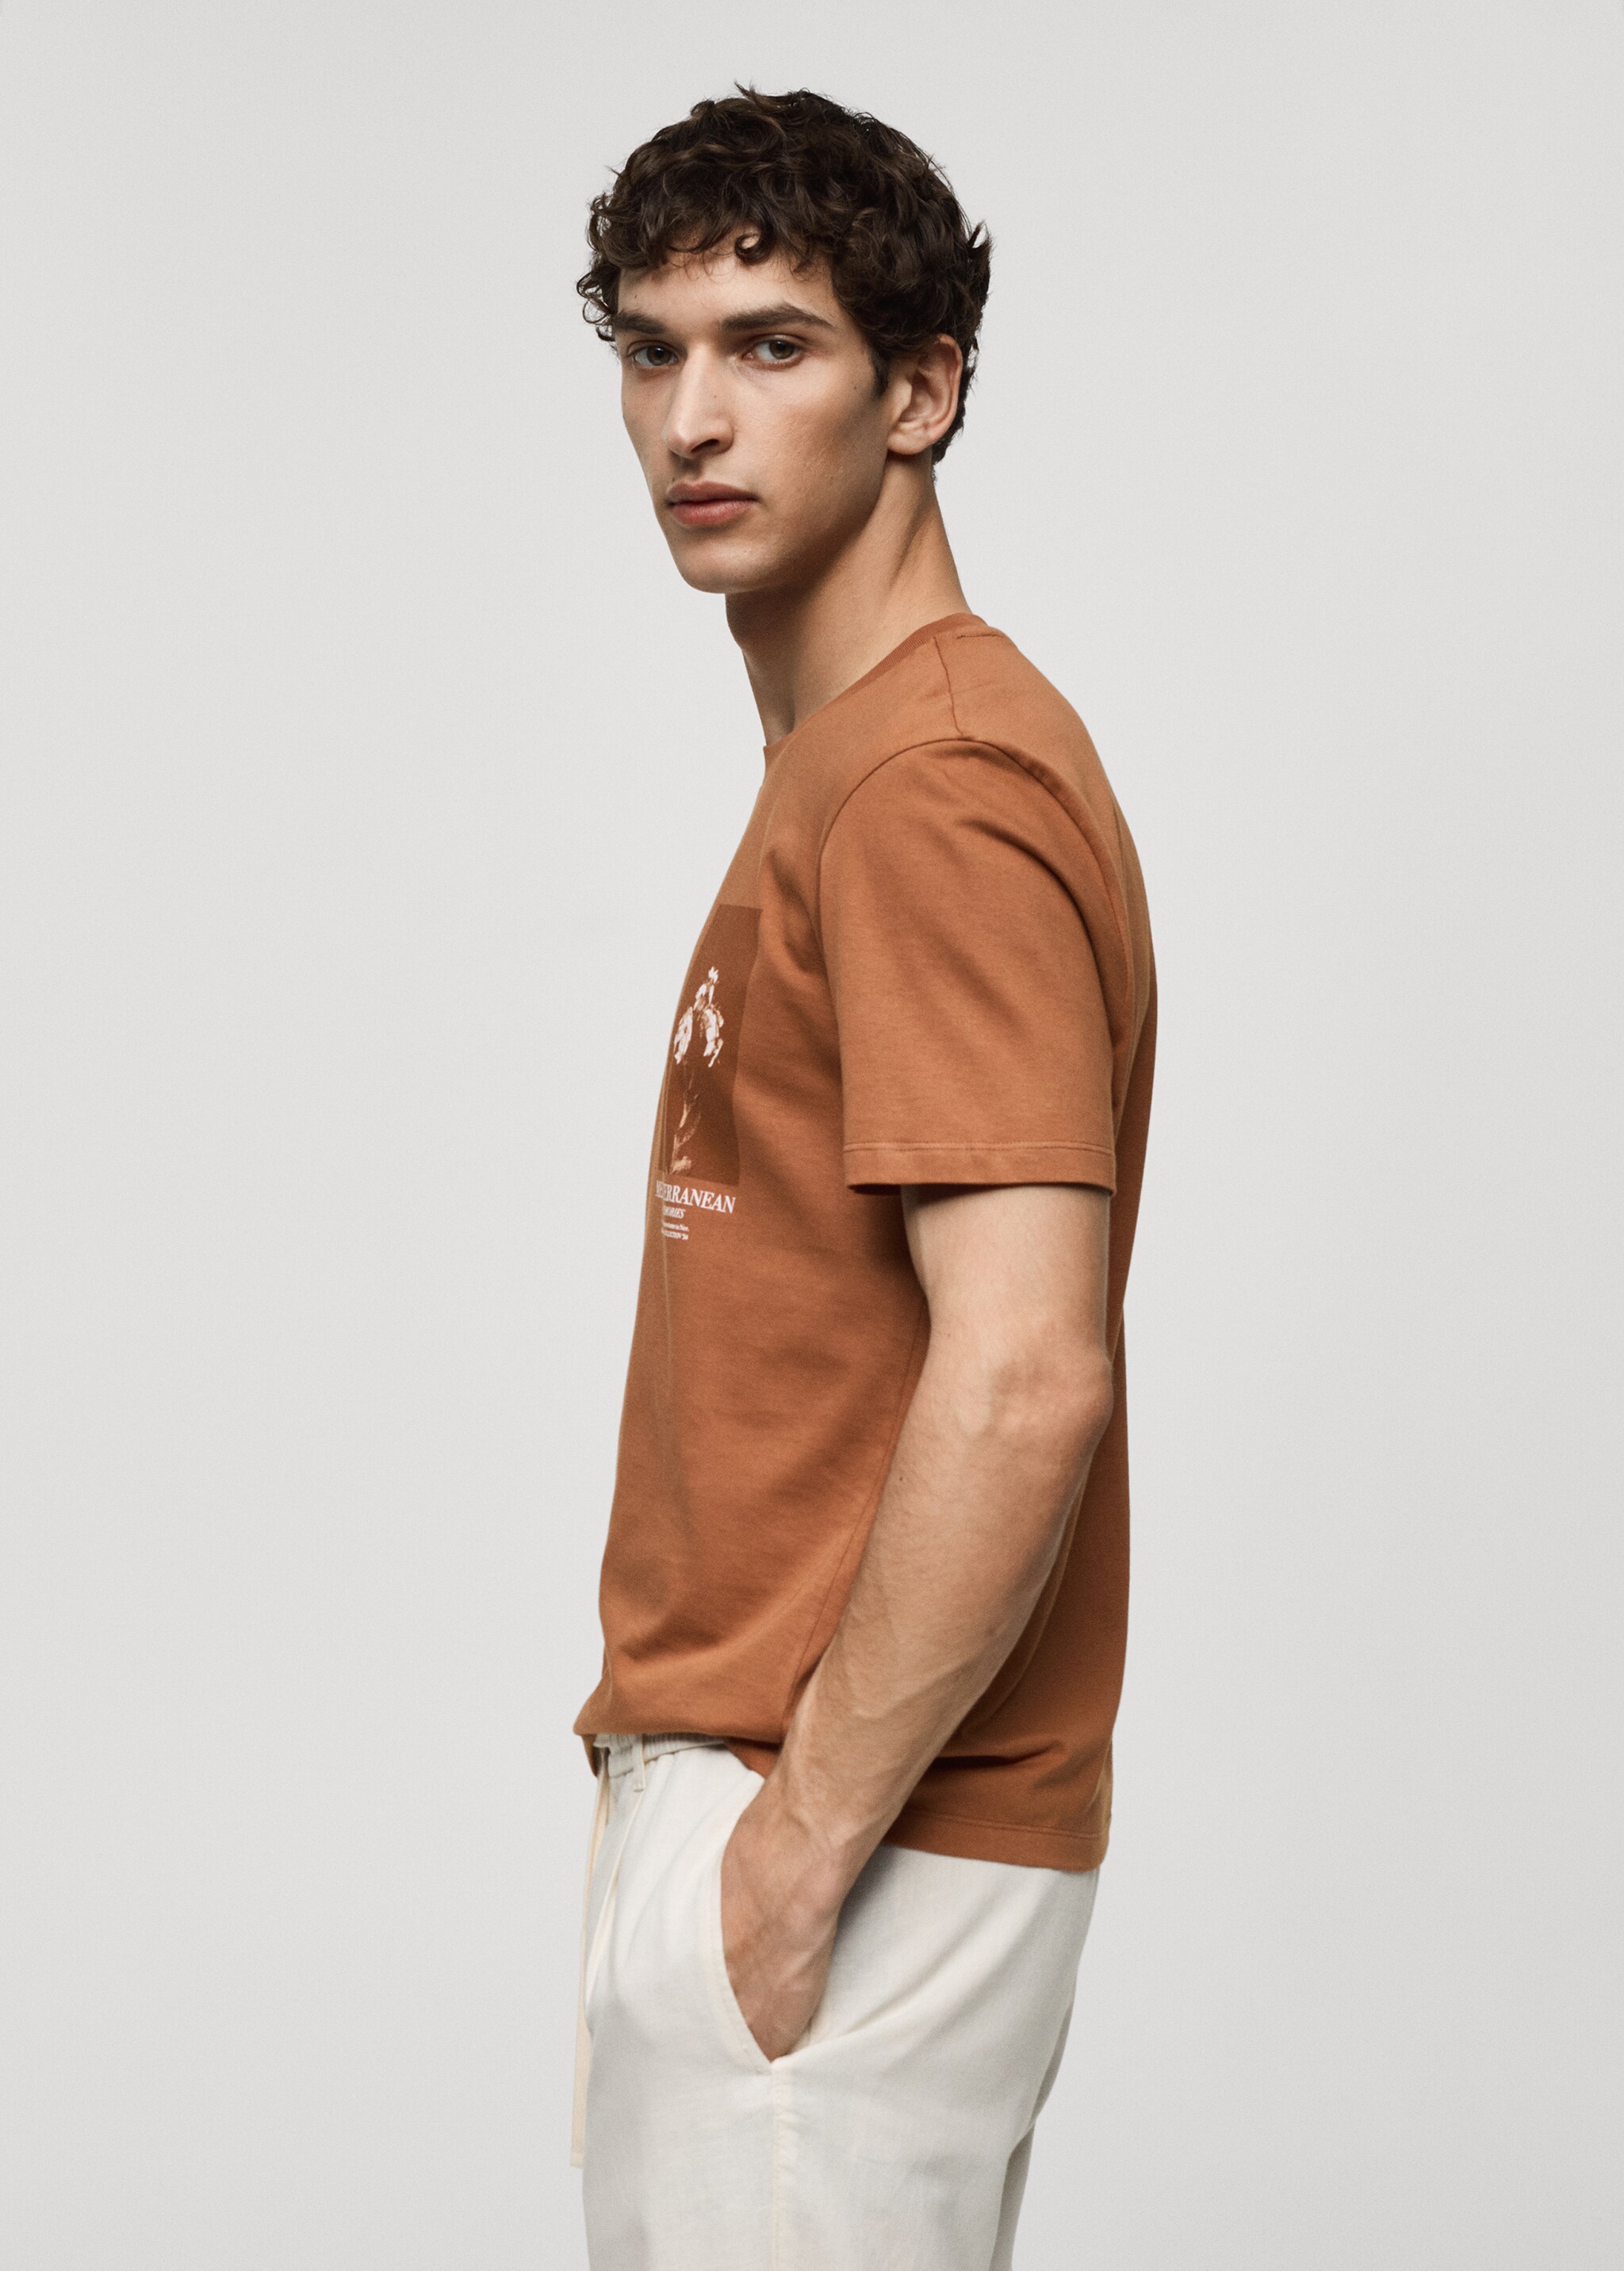 Slim fit 100% printed cotton t-shirt - Details of the article 2